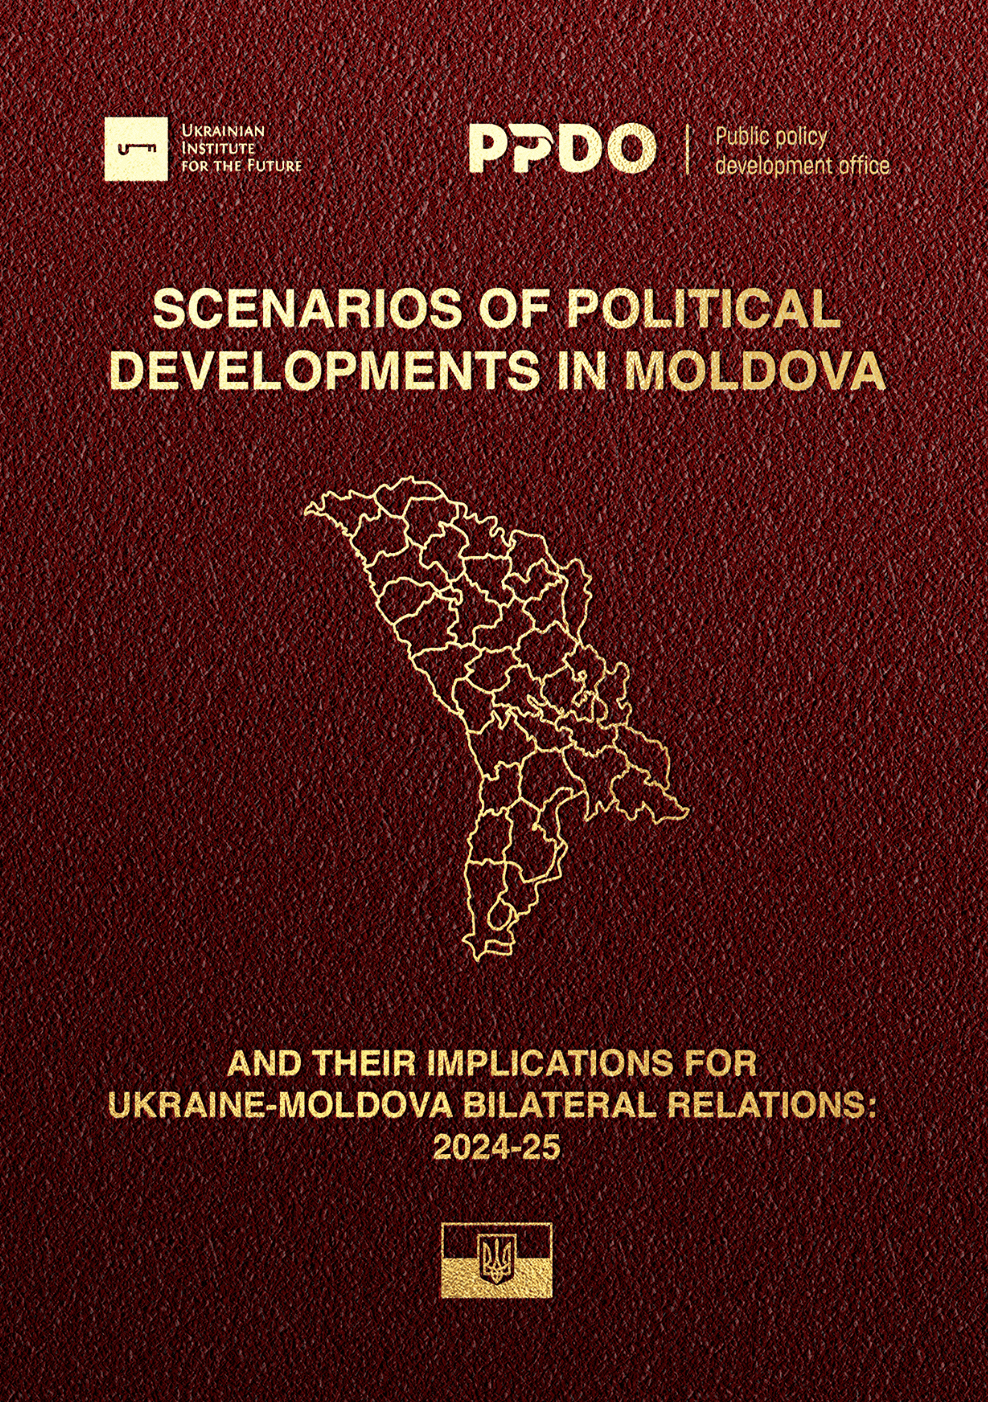 Scenarios of political developments in Moldova and their implications for Ukraine-Moldova bilateral relations 2024-2025